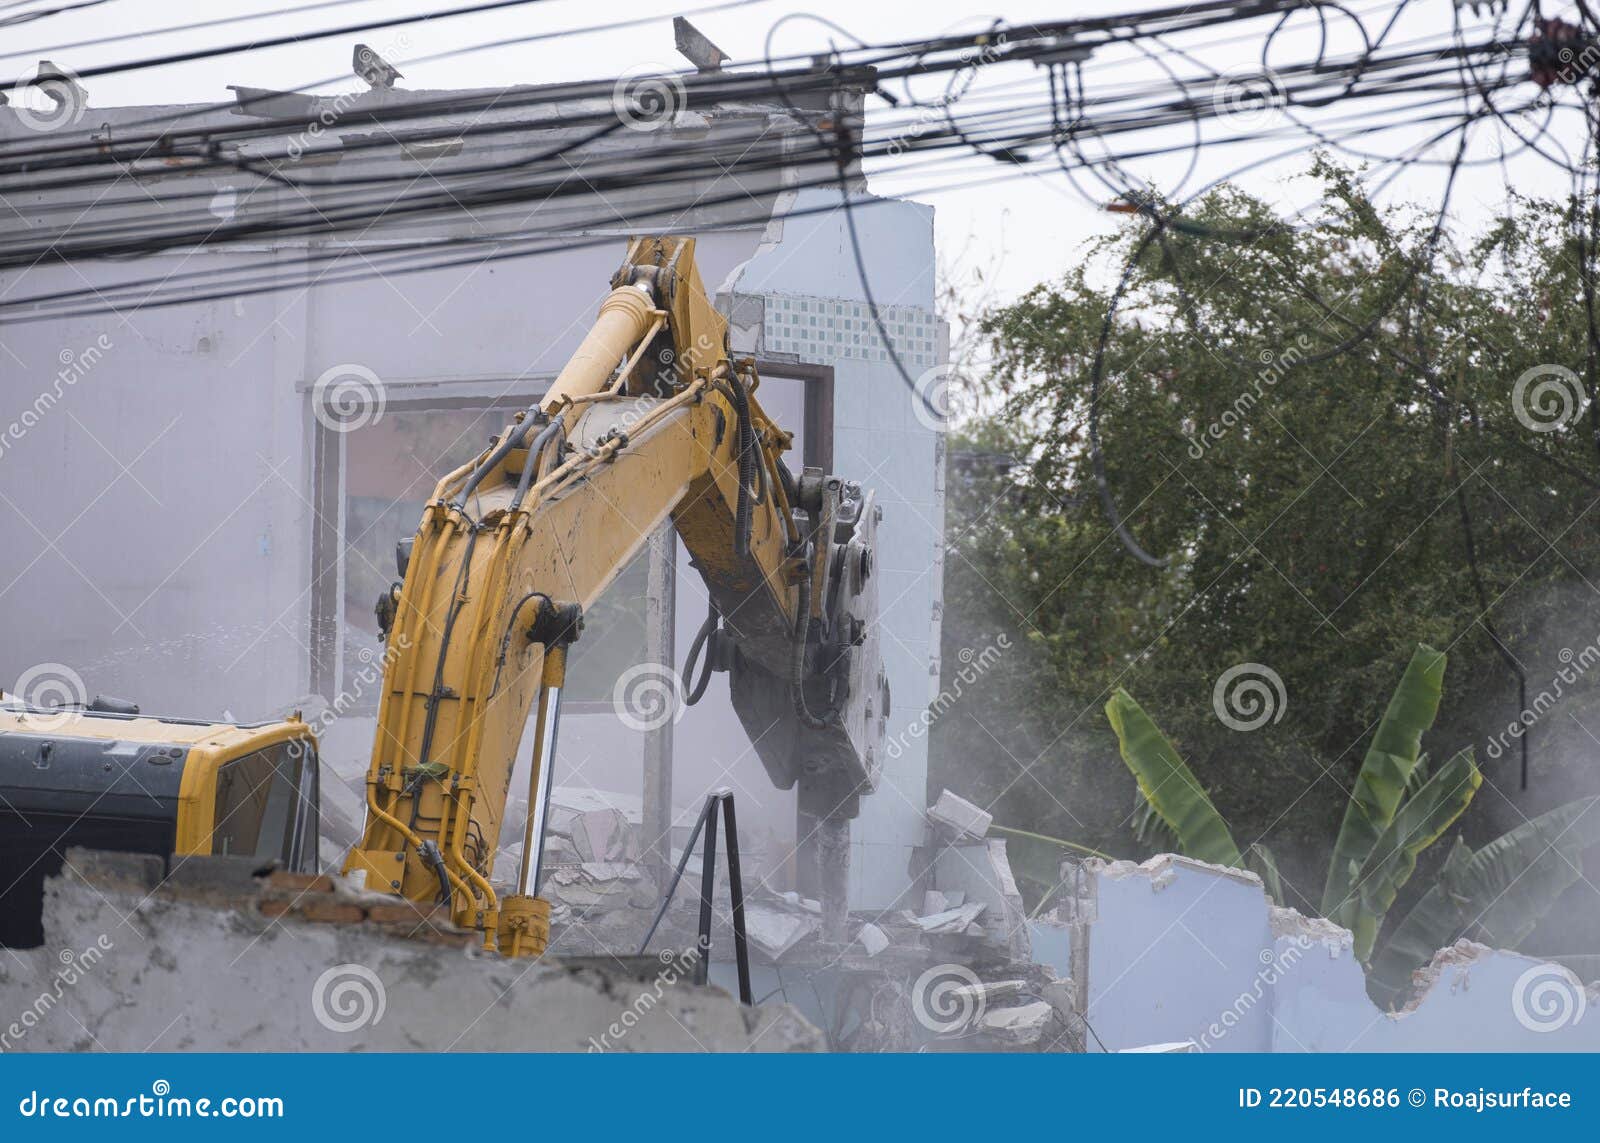 big yellow excavator removal home building by destroy concrete wall. uproot old construction house for development new project